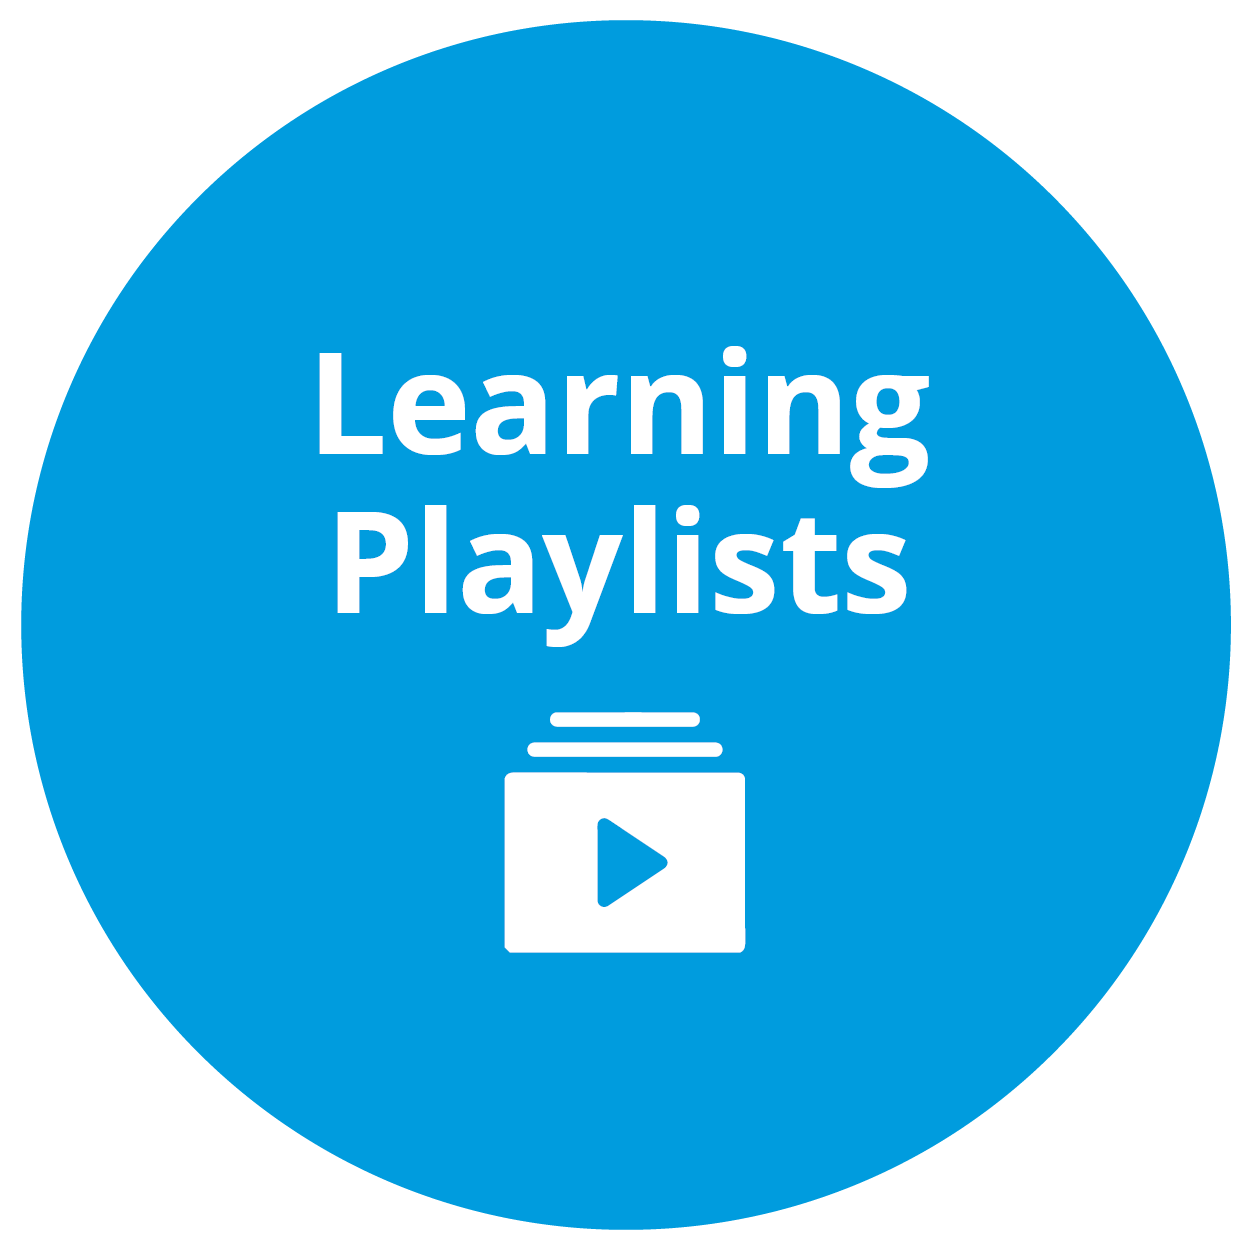 Learning Playlists